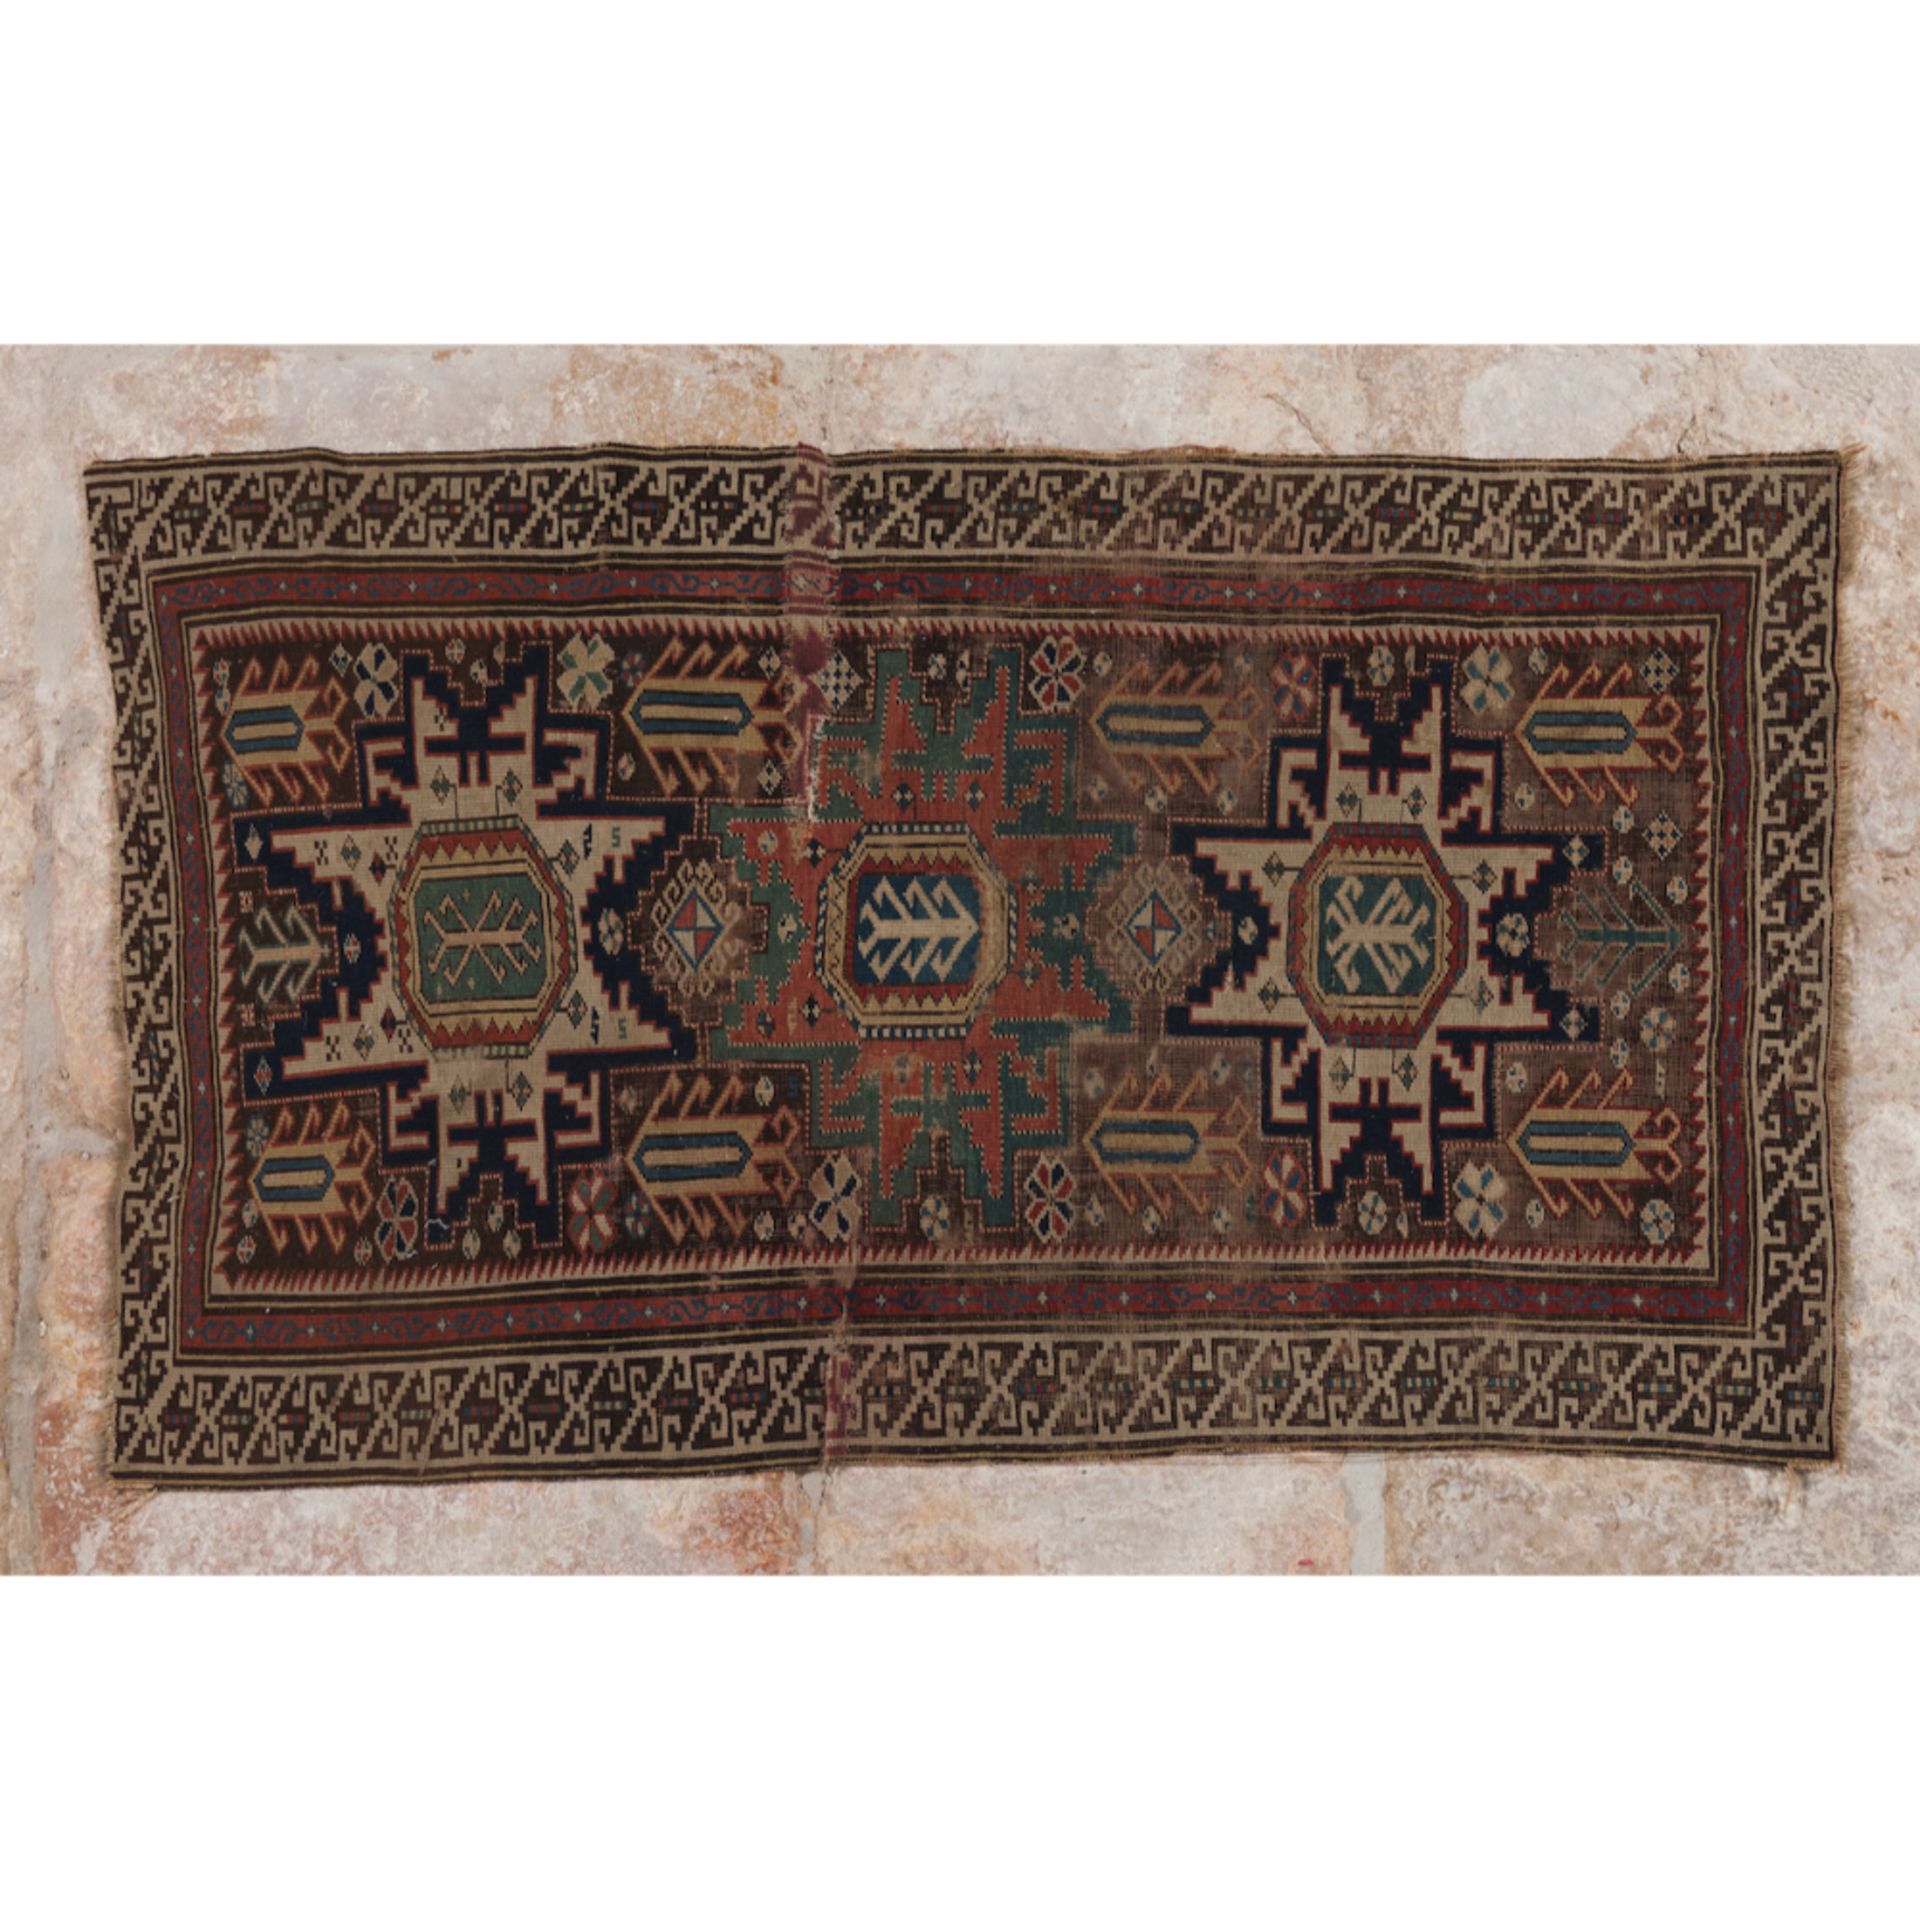 A shirwan rug, Russian wood and cotton Geometric design in shades of burgundy, green and blue (signs